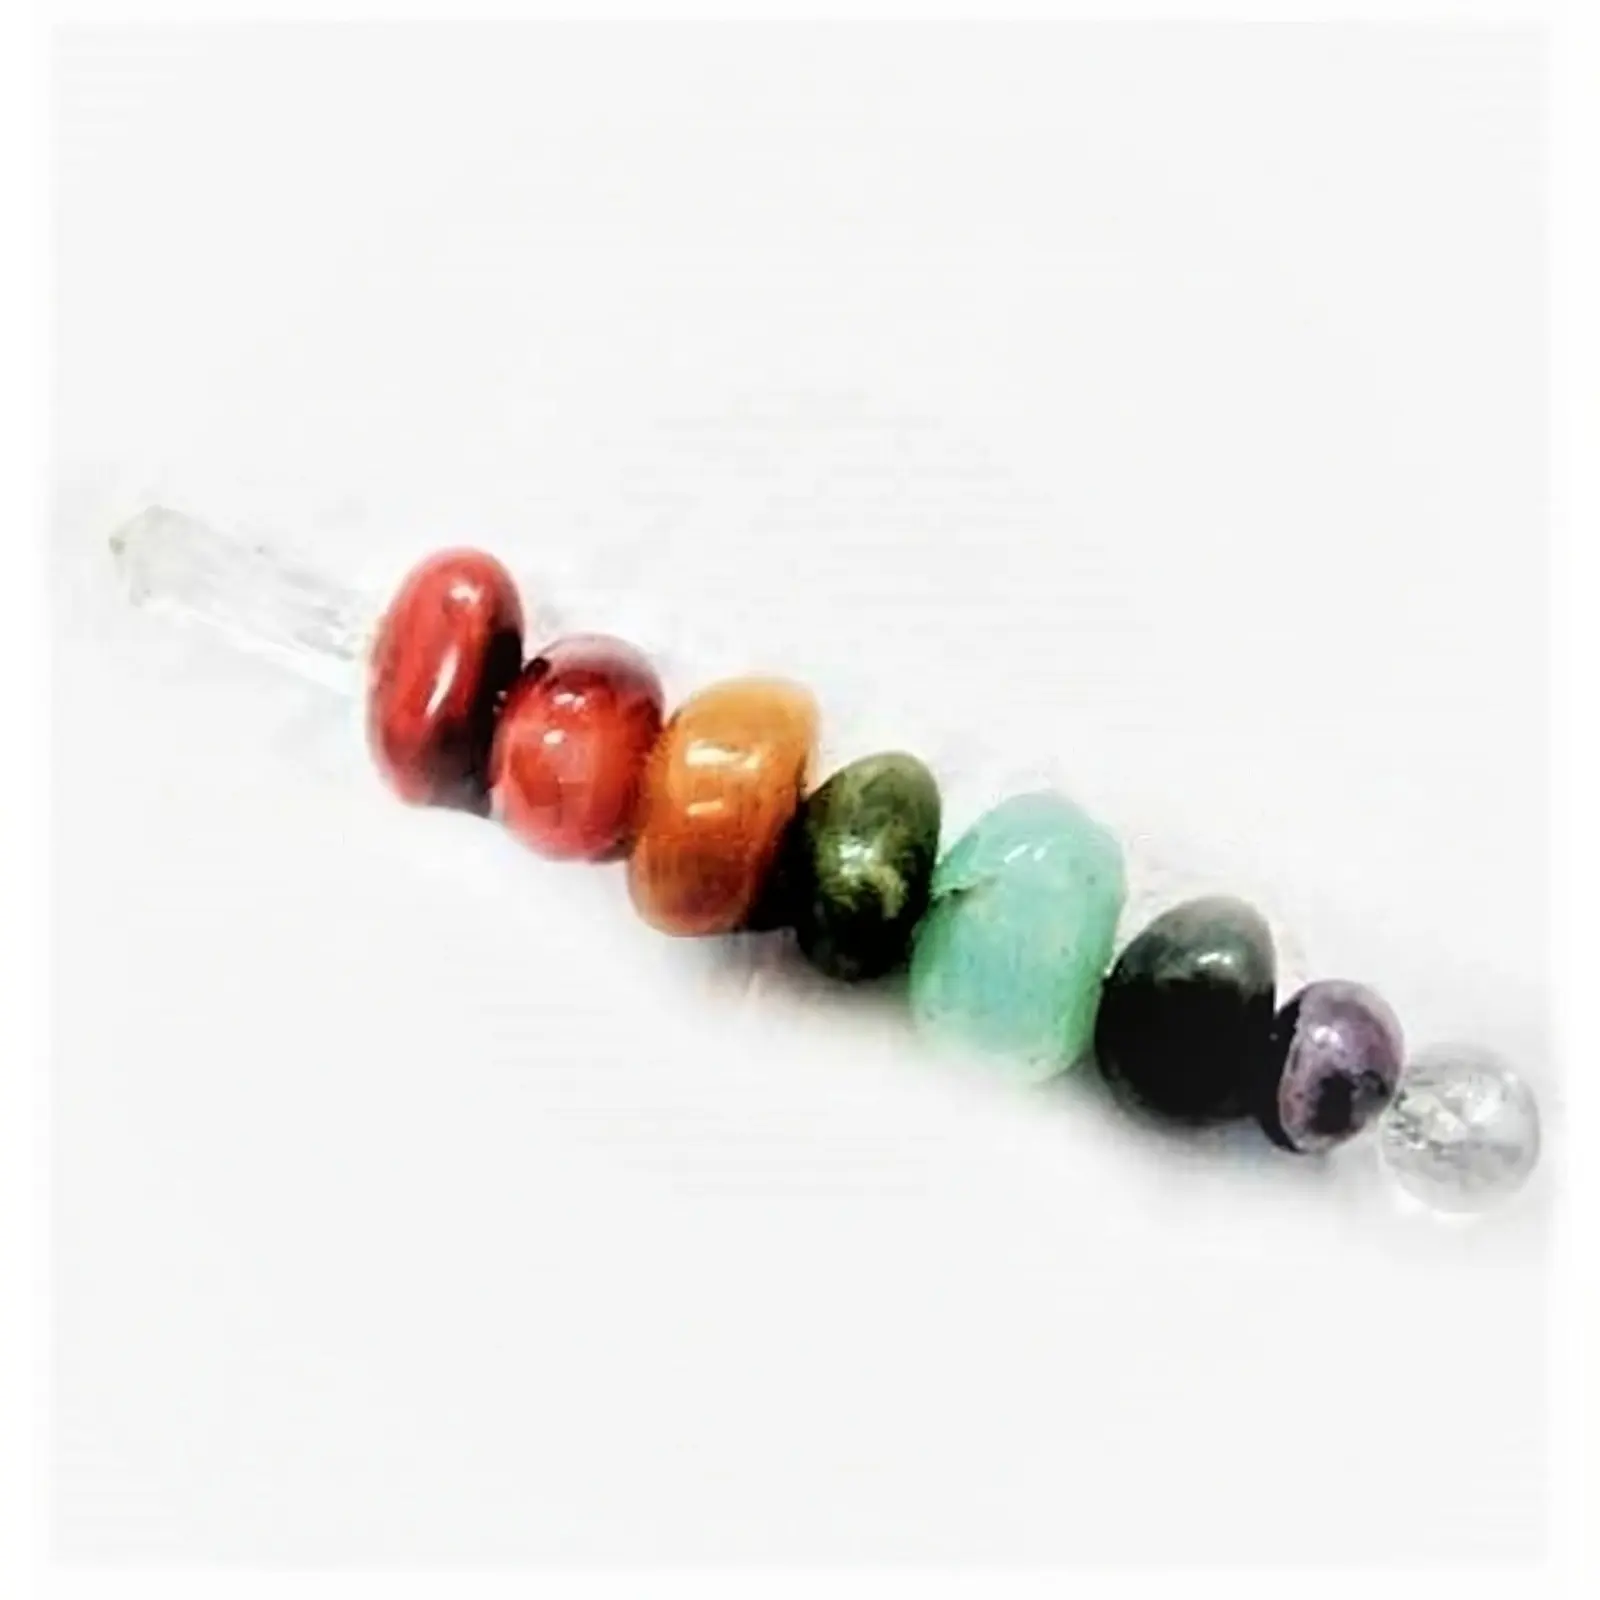 Chakra Tumble Stone Healing Sticks Wholesaler India Agate Stick Exporter Crystal Crafts Natural Stones Buy From Aashim Agate